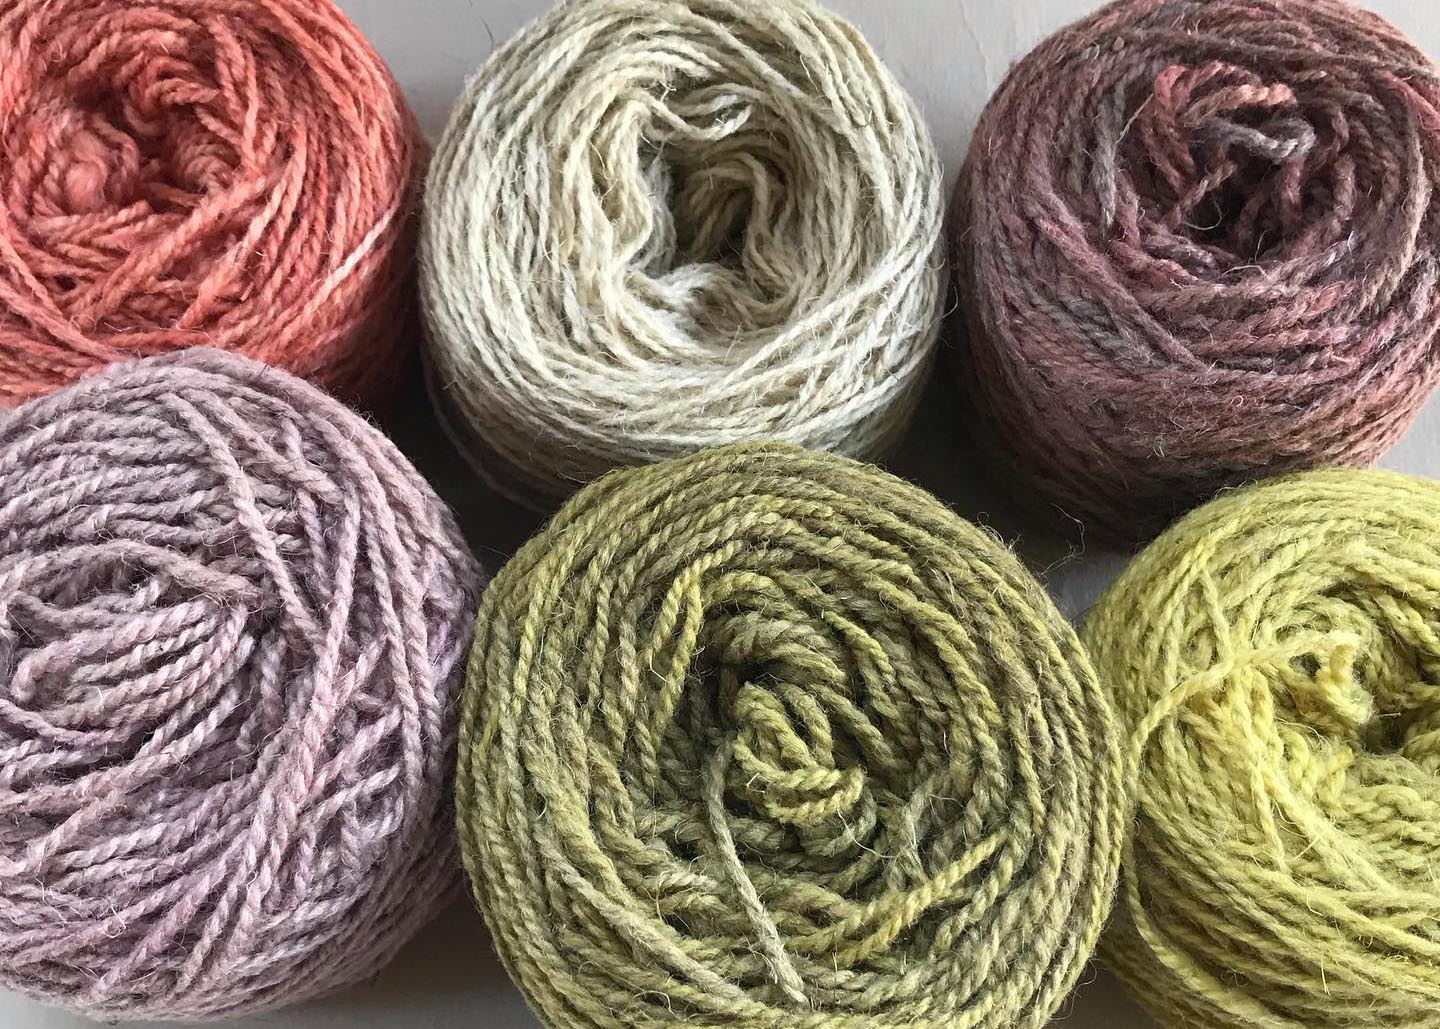 Natural dye yarn, dyed by hand.